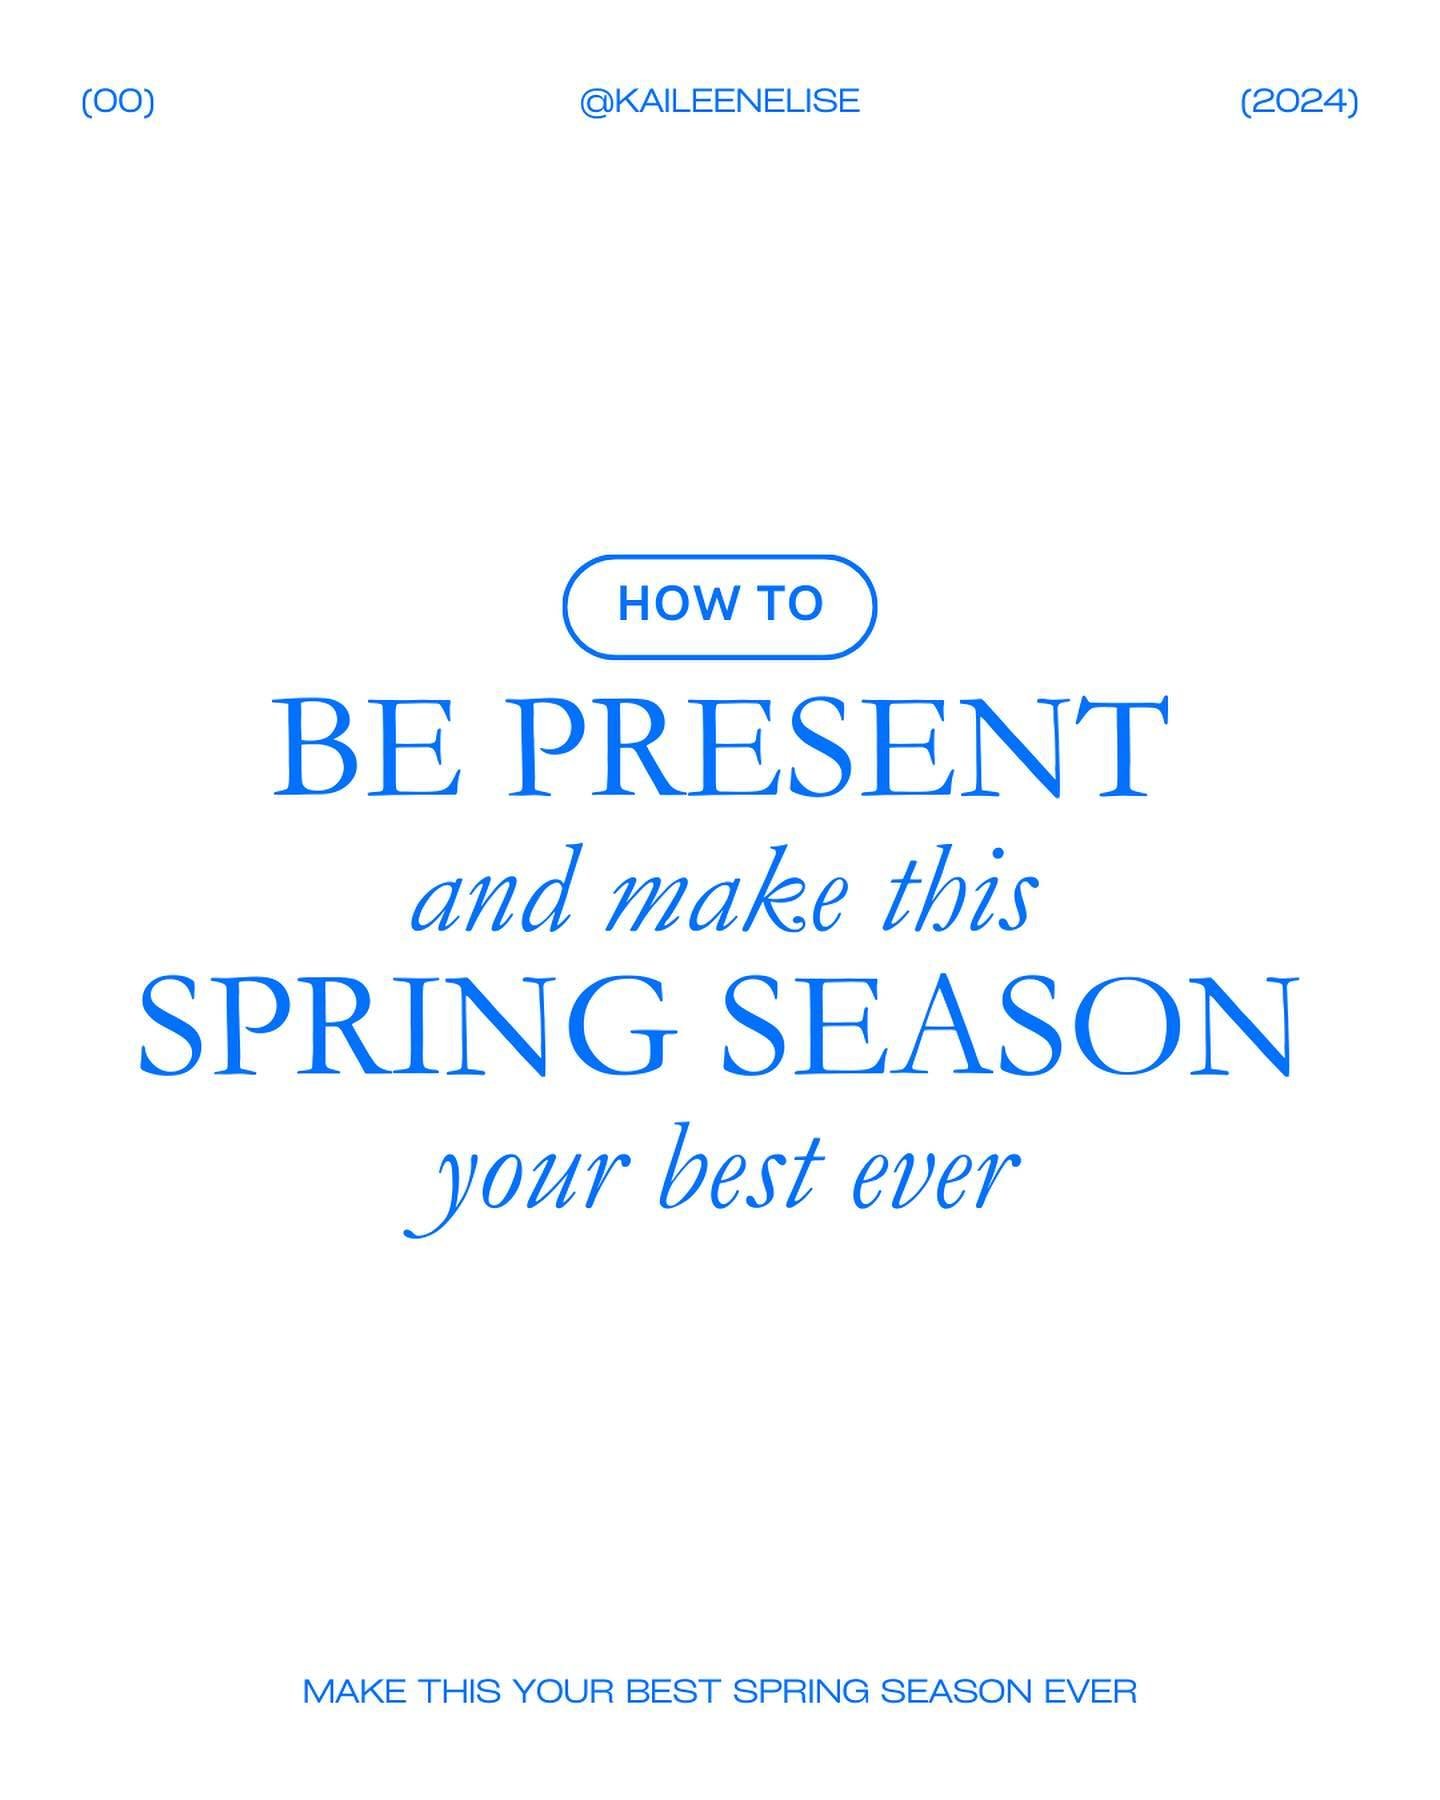 Being present doesn&rsquo;t just happen.

It&rsquo;s a practice. Cultivated on purpose. 

Make this spring your best ever by:

⨠ Setting intentions
⨠ Aligning with the season
⨠ Practicing daily rituals
⨠ Finding your creative flow

All of this is tot